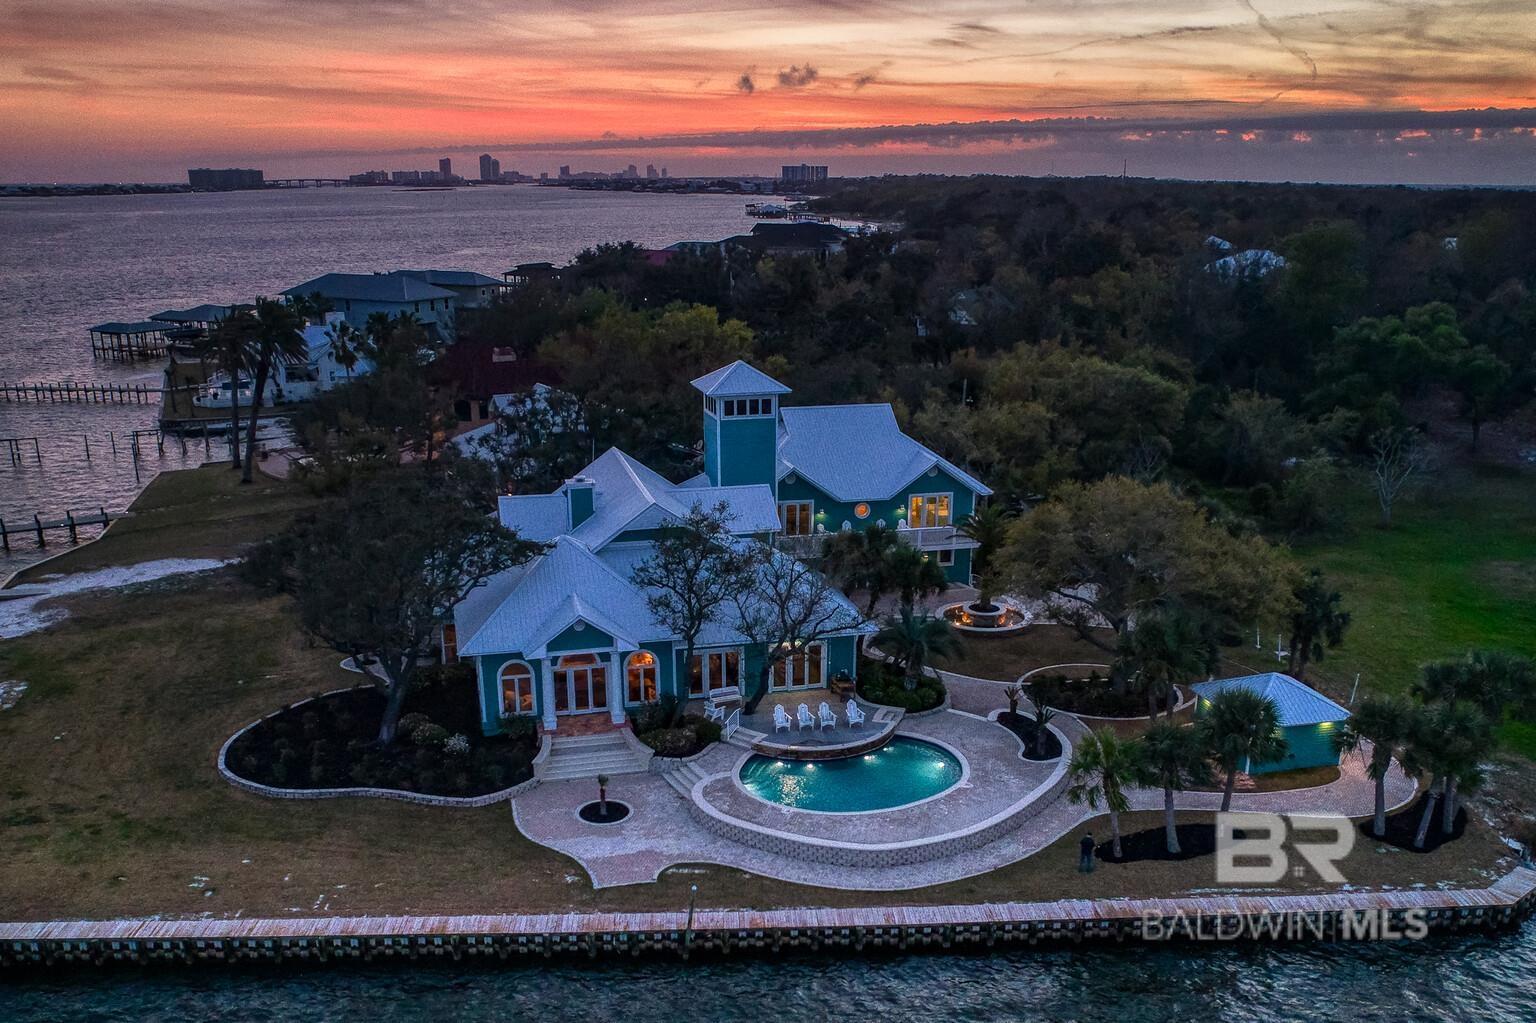 Imagine tranquil sunsets, an abundance of water activities and making memories with friends and family in this sprawling estate home. This sophisticated 8,850 sq ft home invites you as you step into the foyer surrounded by reclaimed wood. A massive kitchen with upgraded appliances perfect for entertaining and surrounded with windows overlooking stunning views. 230 feet of lush landscaping of waterfront property on Bayou St John. The home features 7 BR and 8.5 baths. Mother in law suite and separate apartment with exterior entry.